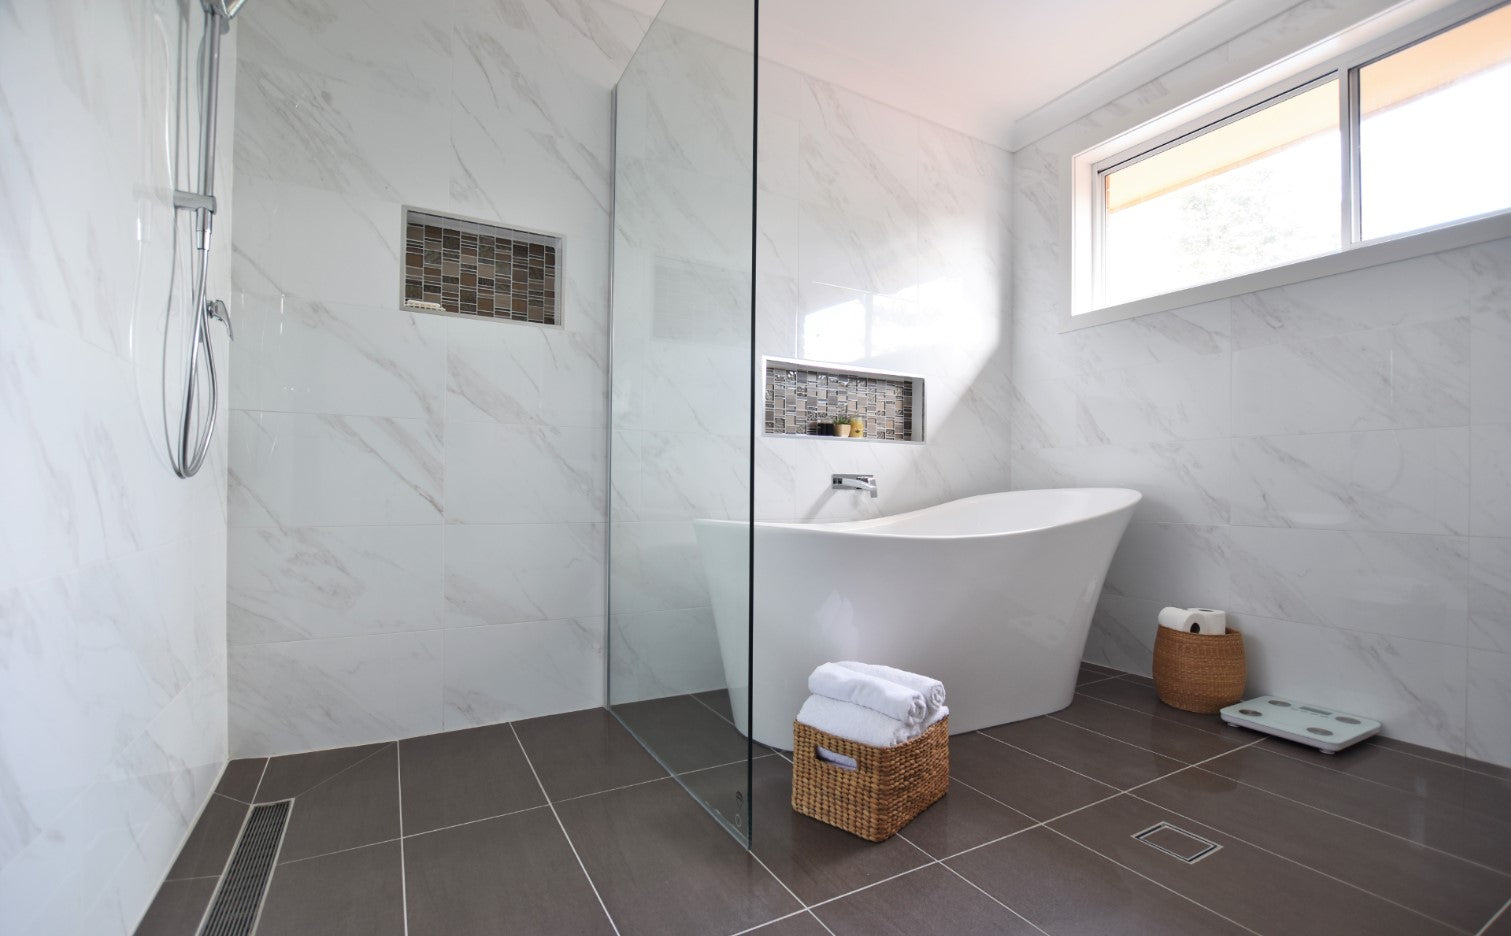 https://cdn.shopify.com/s/files/1/0251/6513/5960/files/Bathrooms_with_walk-in_showers_have_less_glass_and_aluminium_to_clean.jpg?v=1583296121